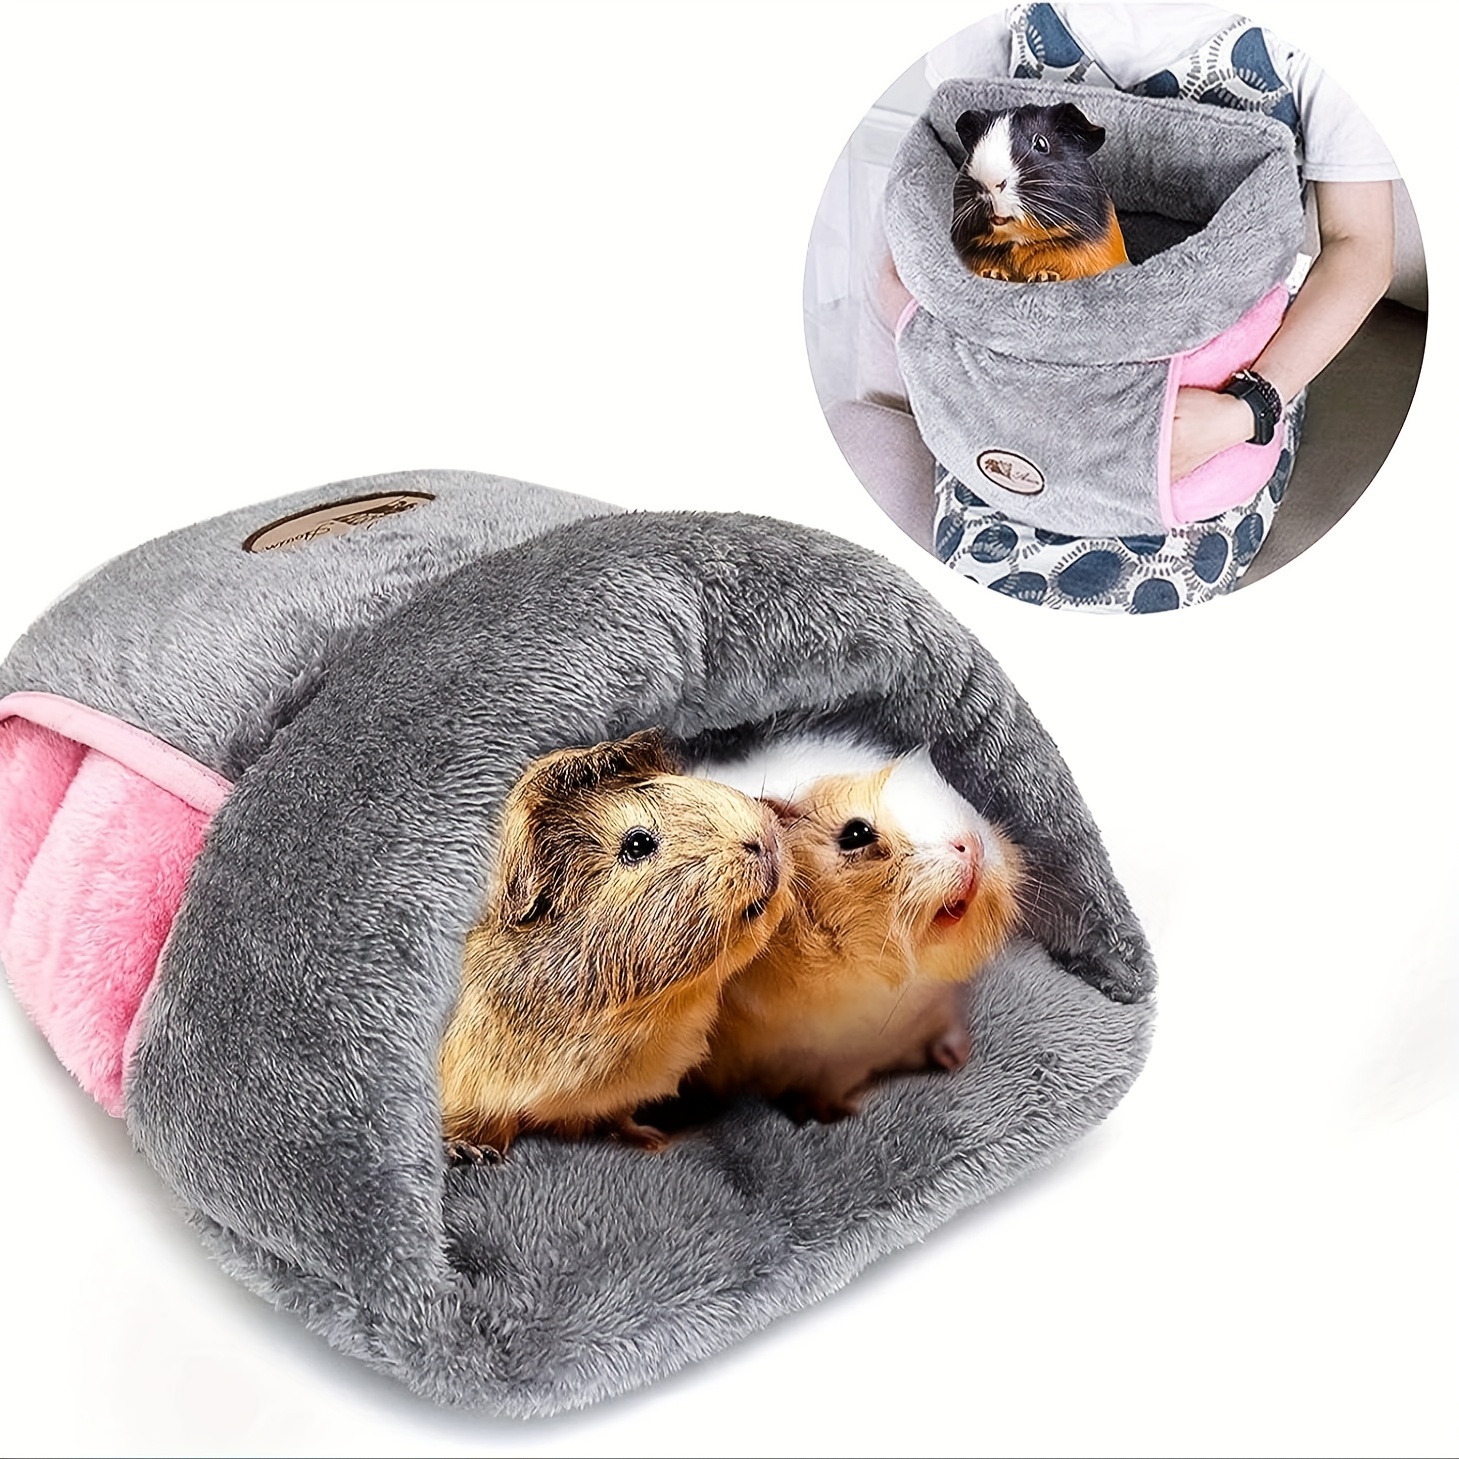 

Hamster Bed Cuddle Cave Warm Fleece Cozy House, Bedding Sleeping Cushion Cage Nest For Small Animal Squirrel Chinchilla Rabbit Hedgehog Cage Accessories (grey)